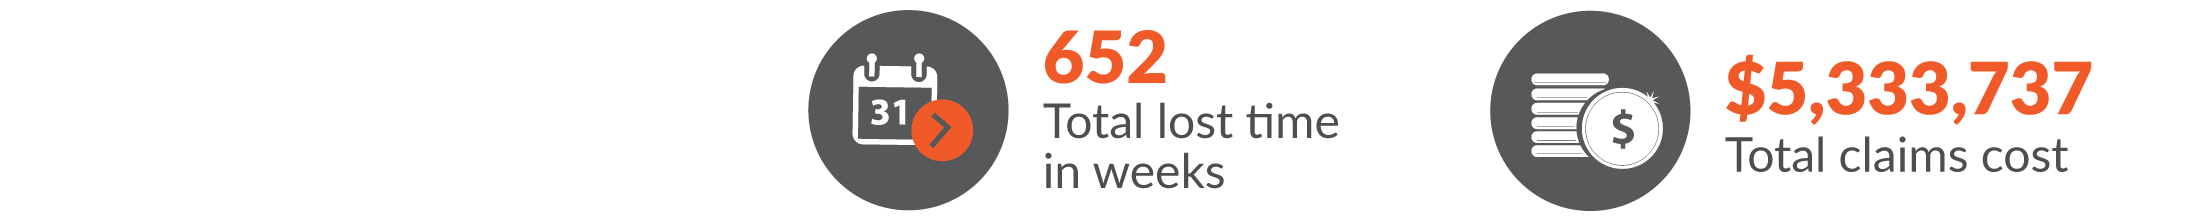 This infographic shows total workers compensation claims for Government administration & defence resulted in 652 total lost time in weeks and $5,333,737 was paid in benefits.